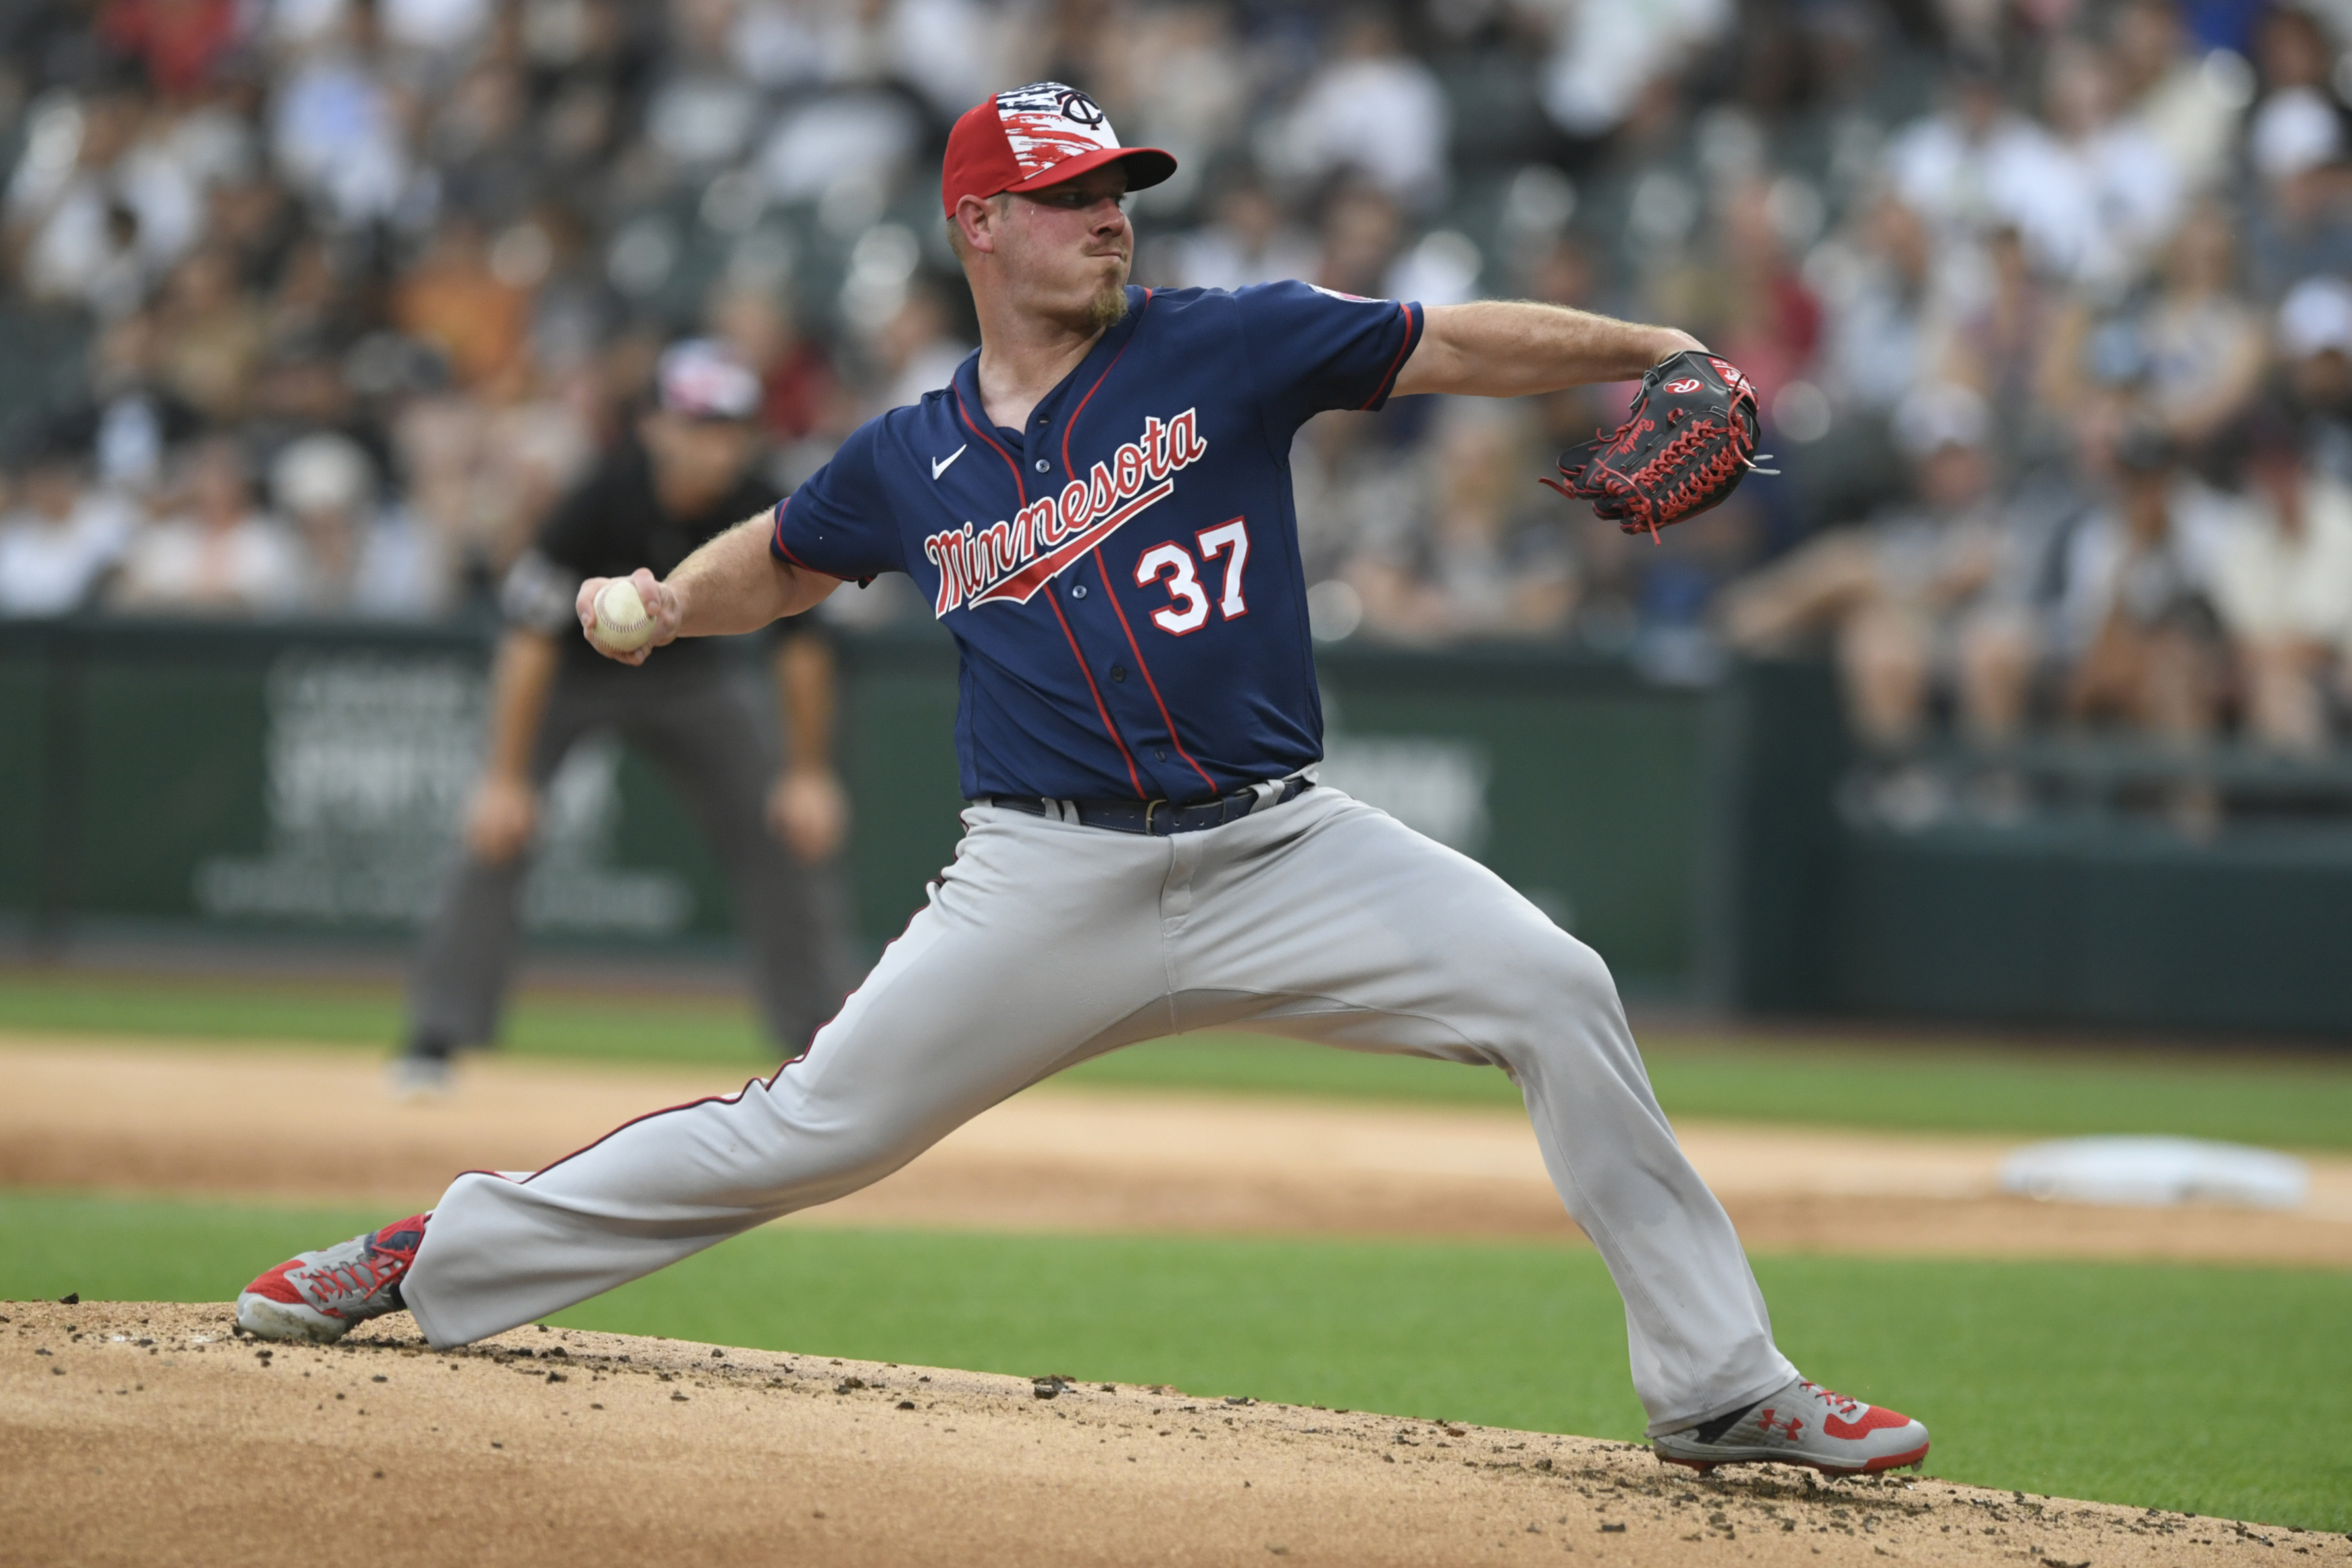 Twins battle back, then fall short in 3-2 loss to White Sox in 10 innings, National Sports